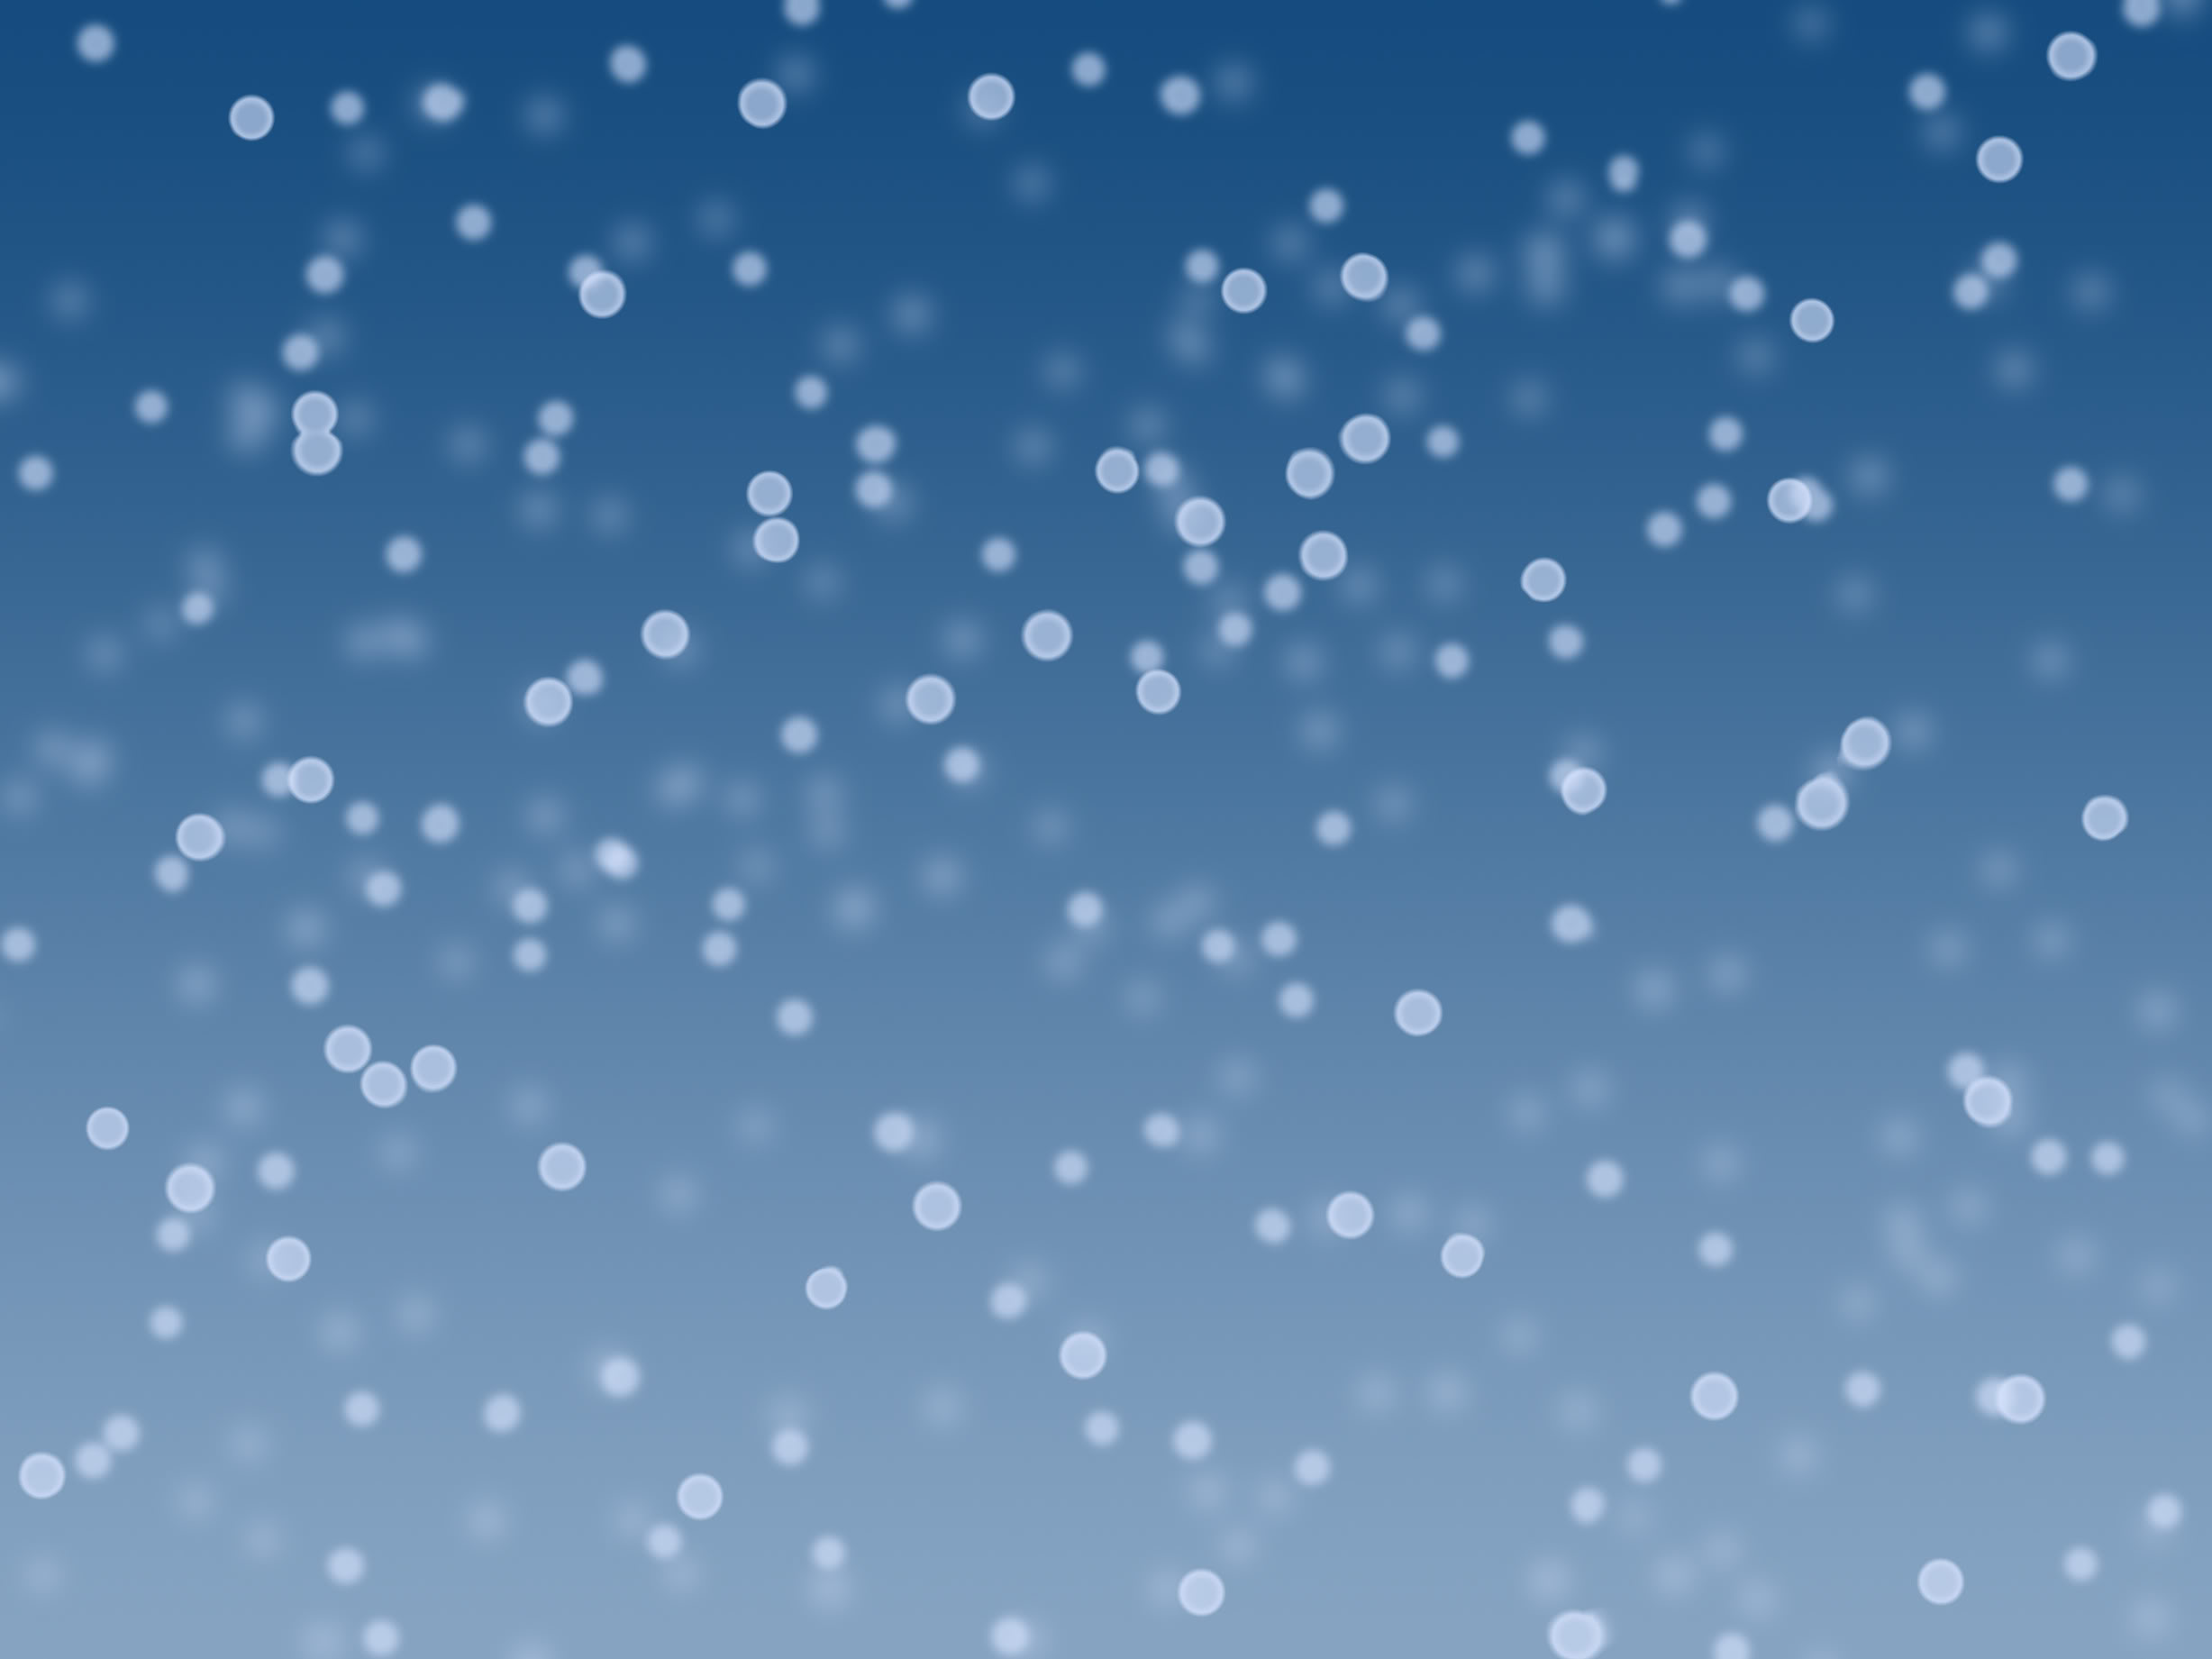 animated clipart snow falling - photo #19